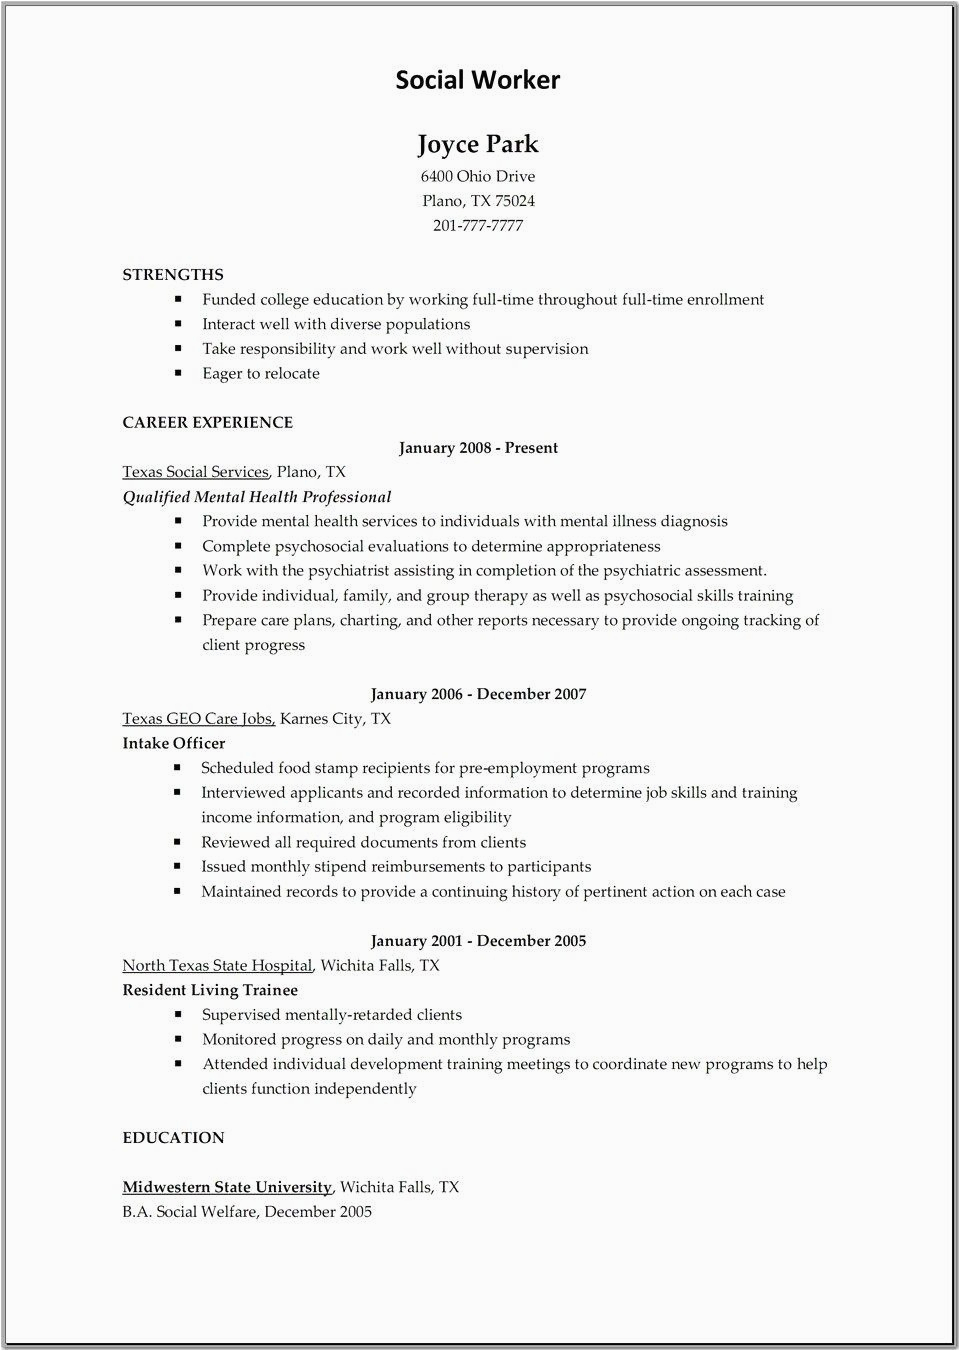 Sample Resume for Child Care Worker with No Experience Luxury Download Child Care Resume Sample In 2020